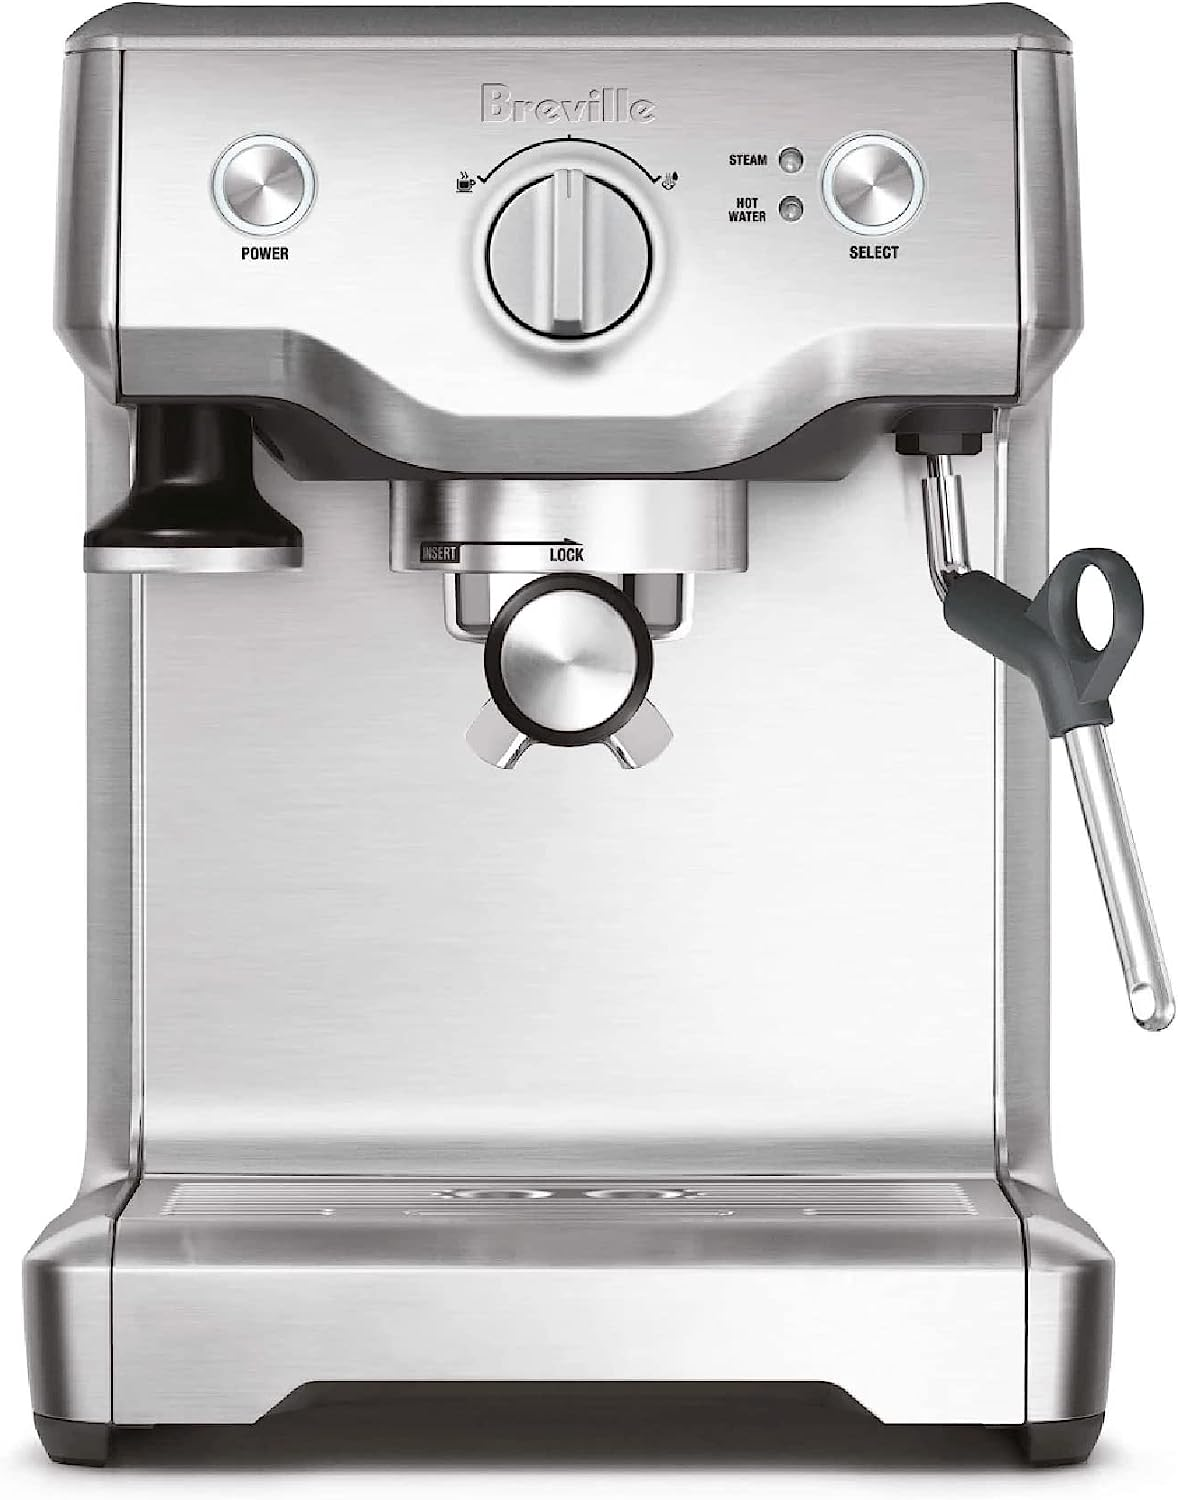 Prime Members: Breville Duo Temp Pro Espresso Machine (Stainless Steel) $374.95